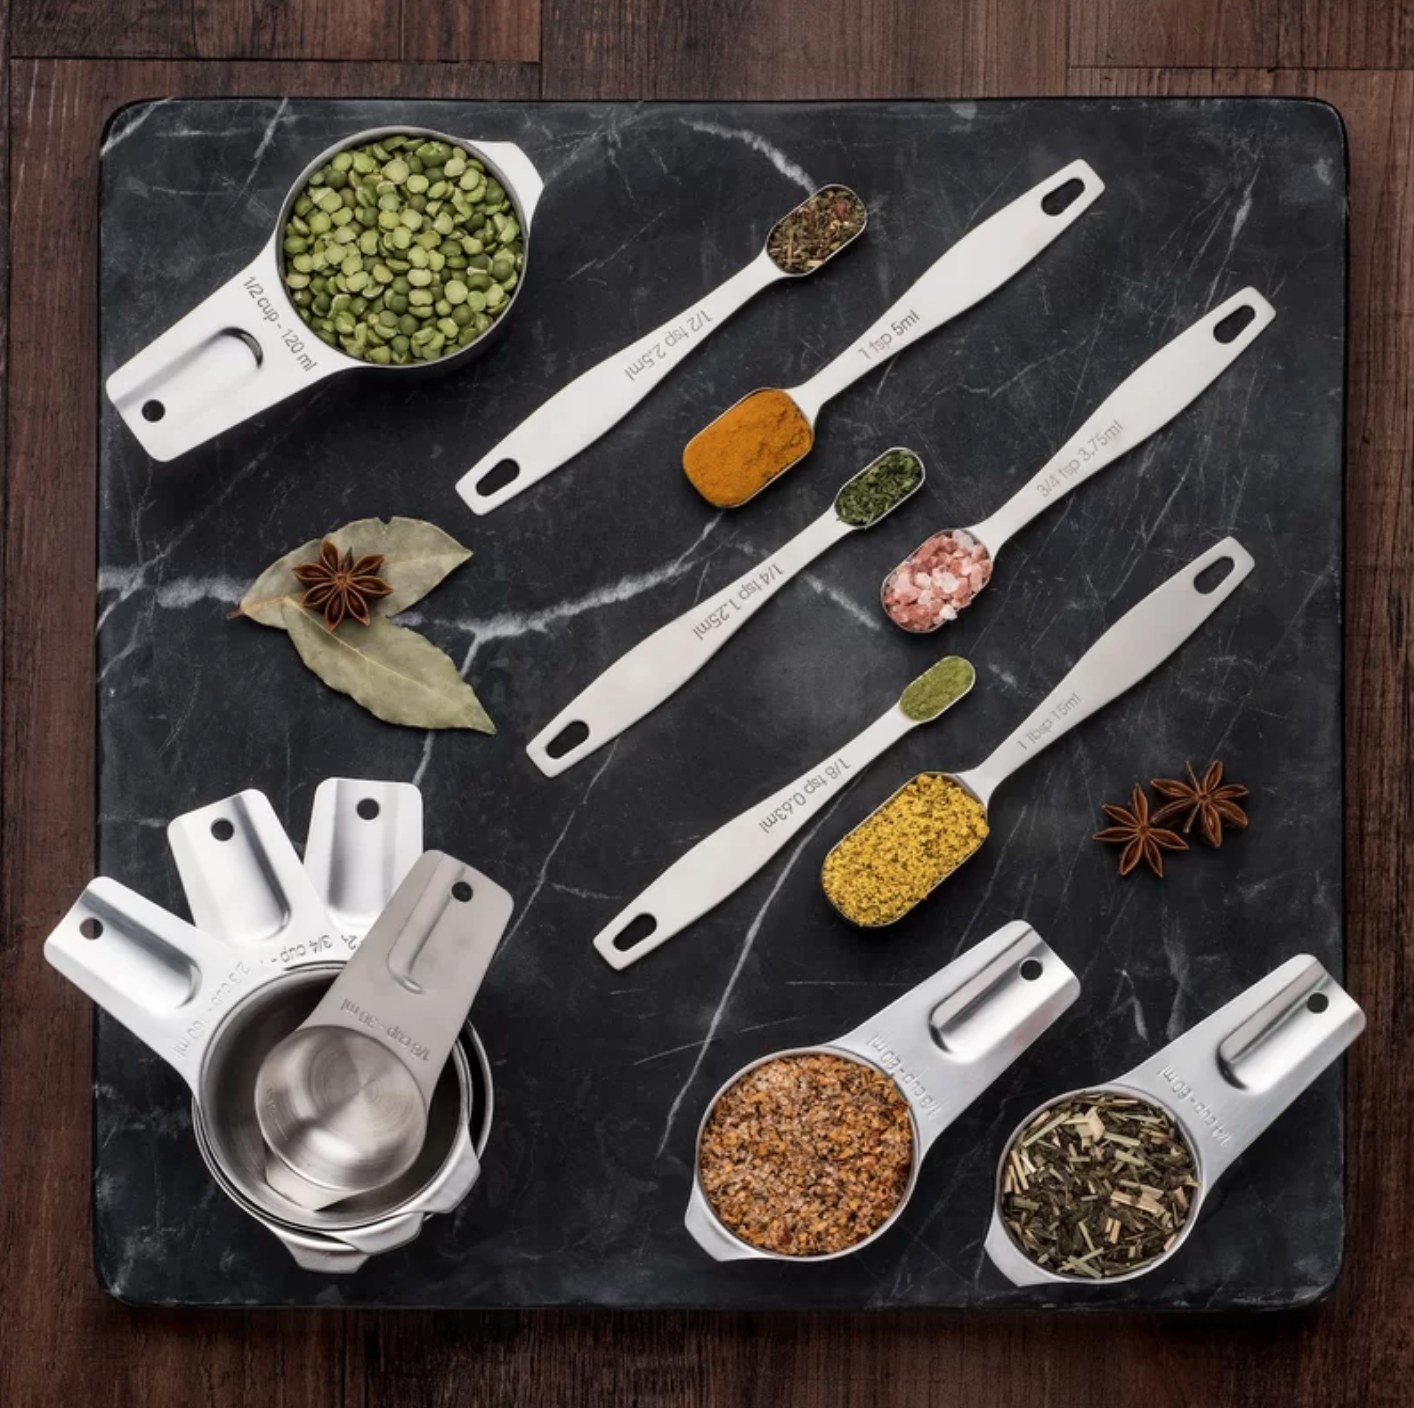 The 13 piece stainless steel measuring spoon and cup set 